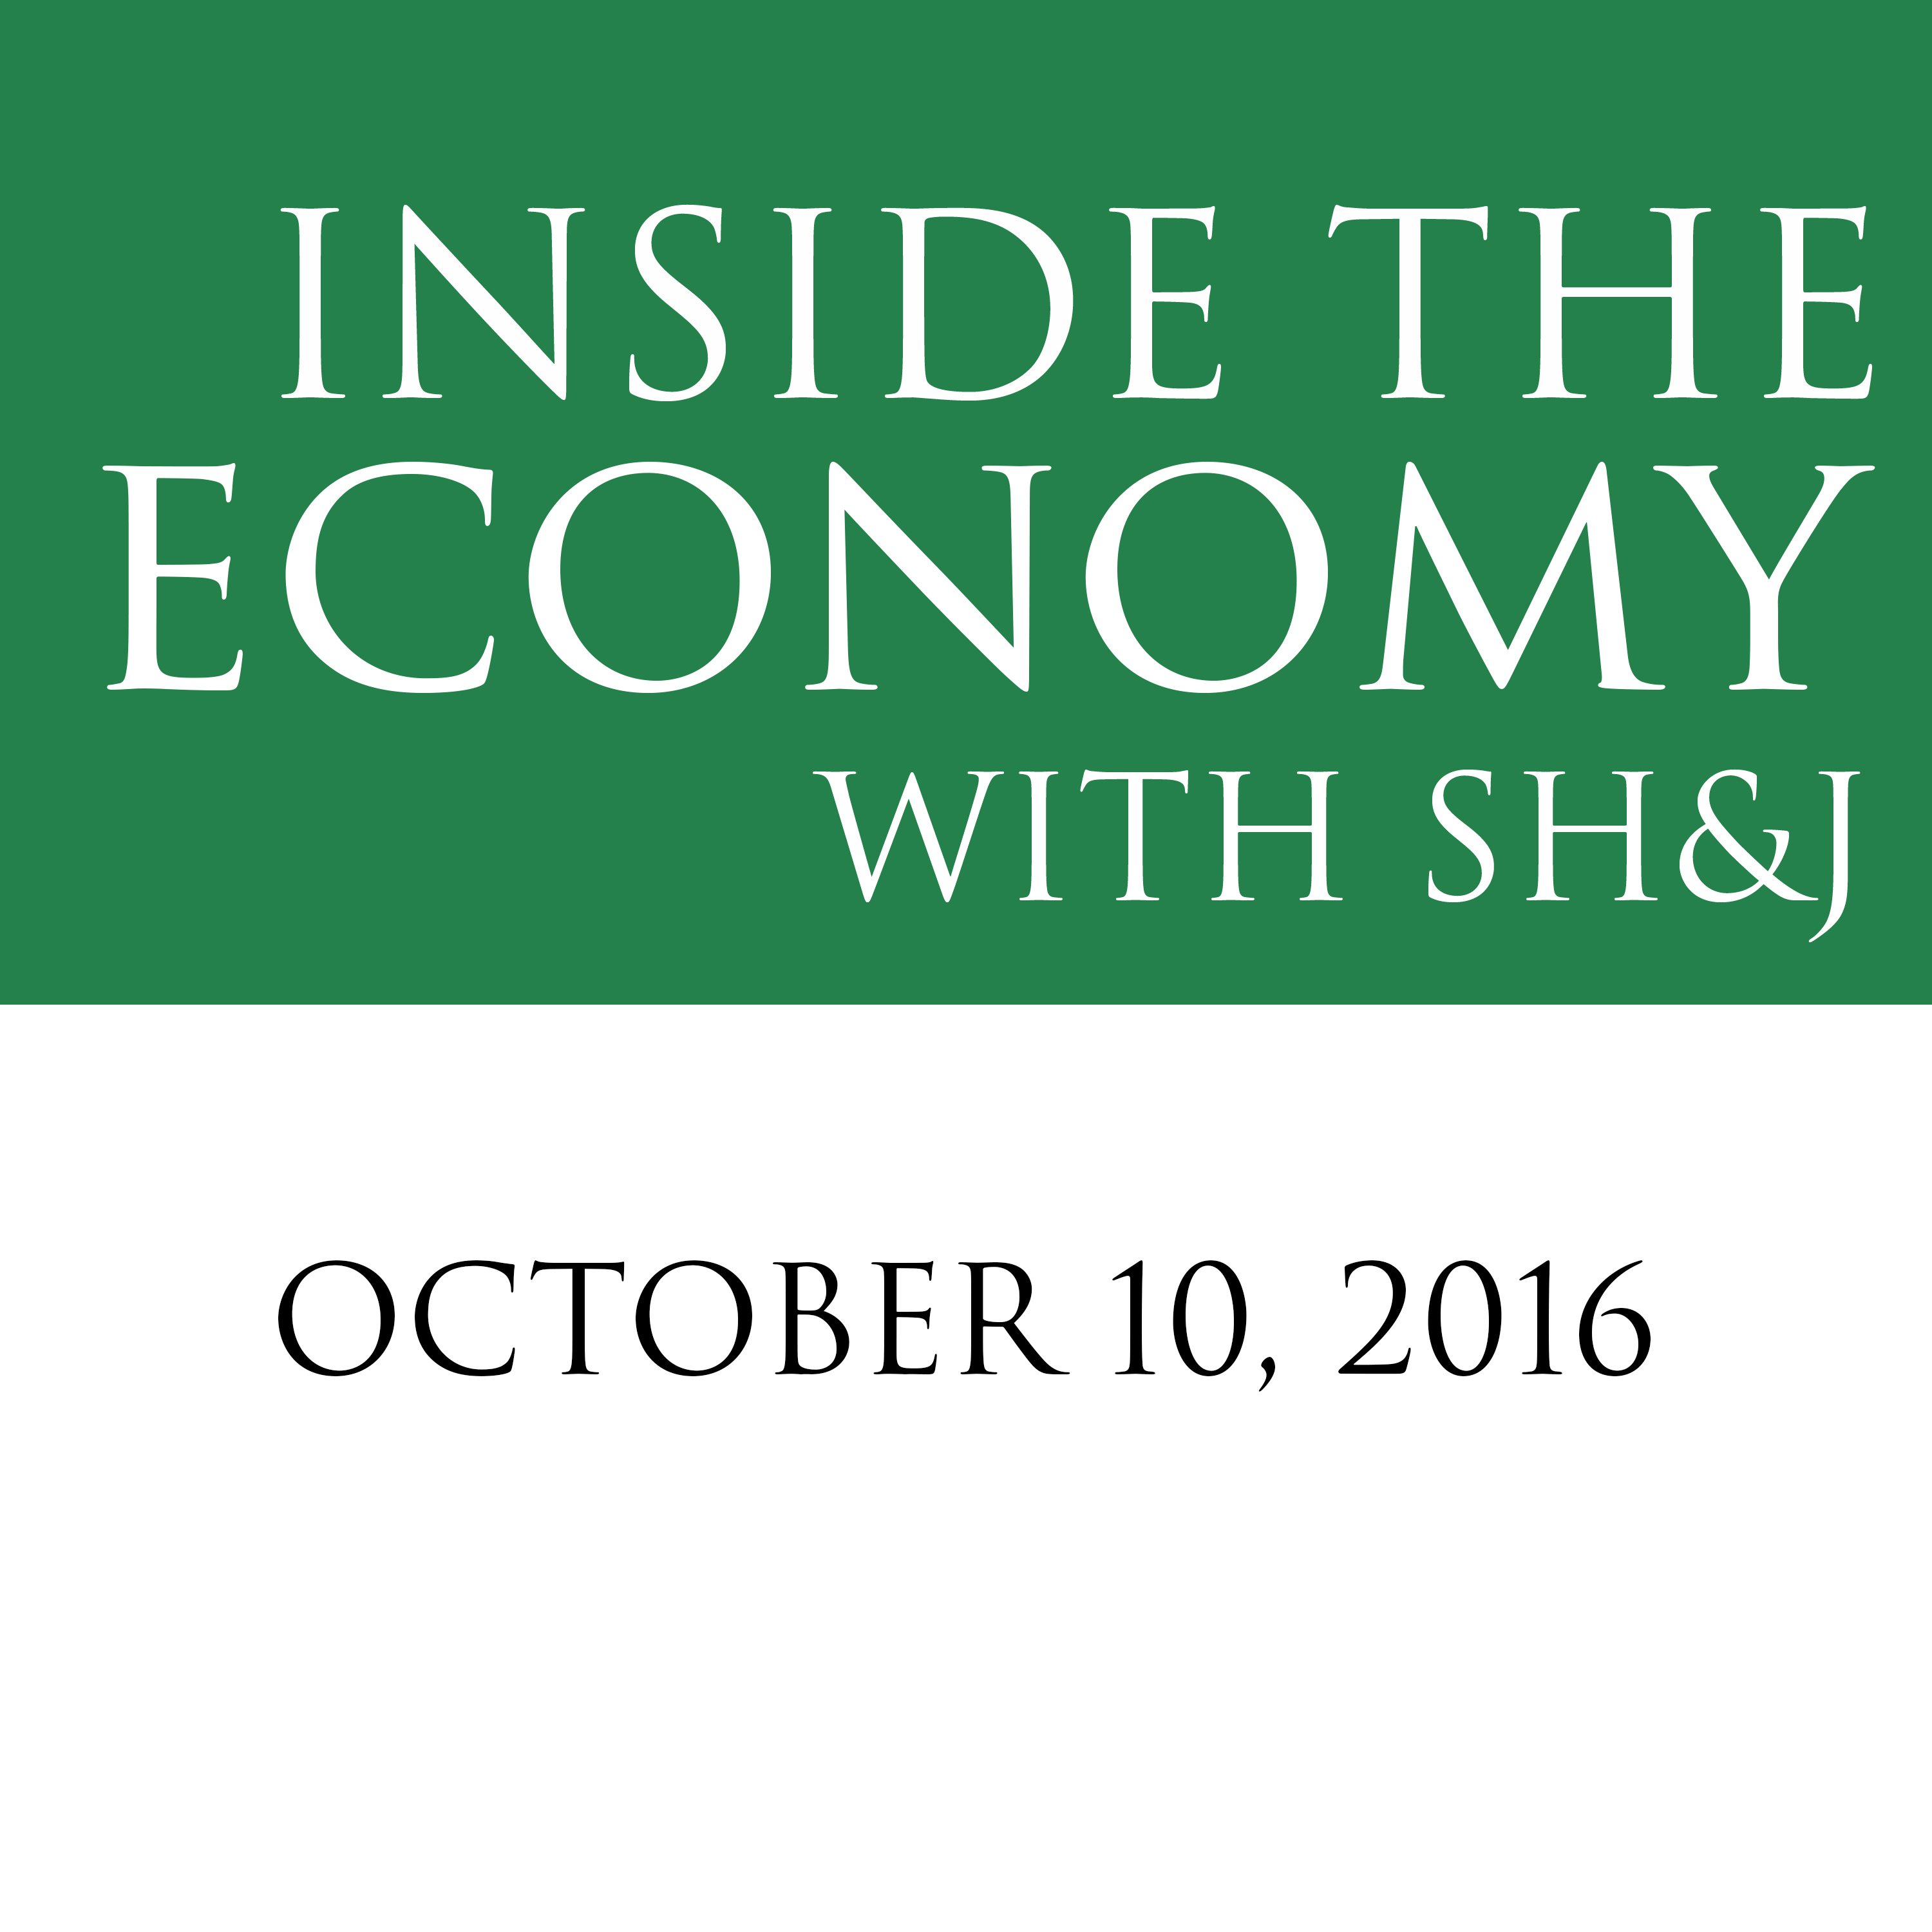 October 10, 2016  --  Inside the Economy with SH&J